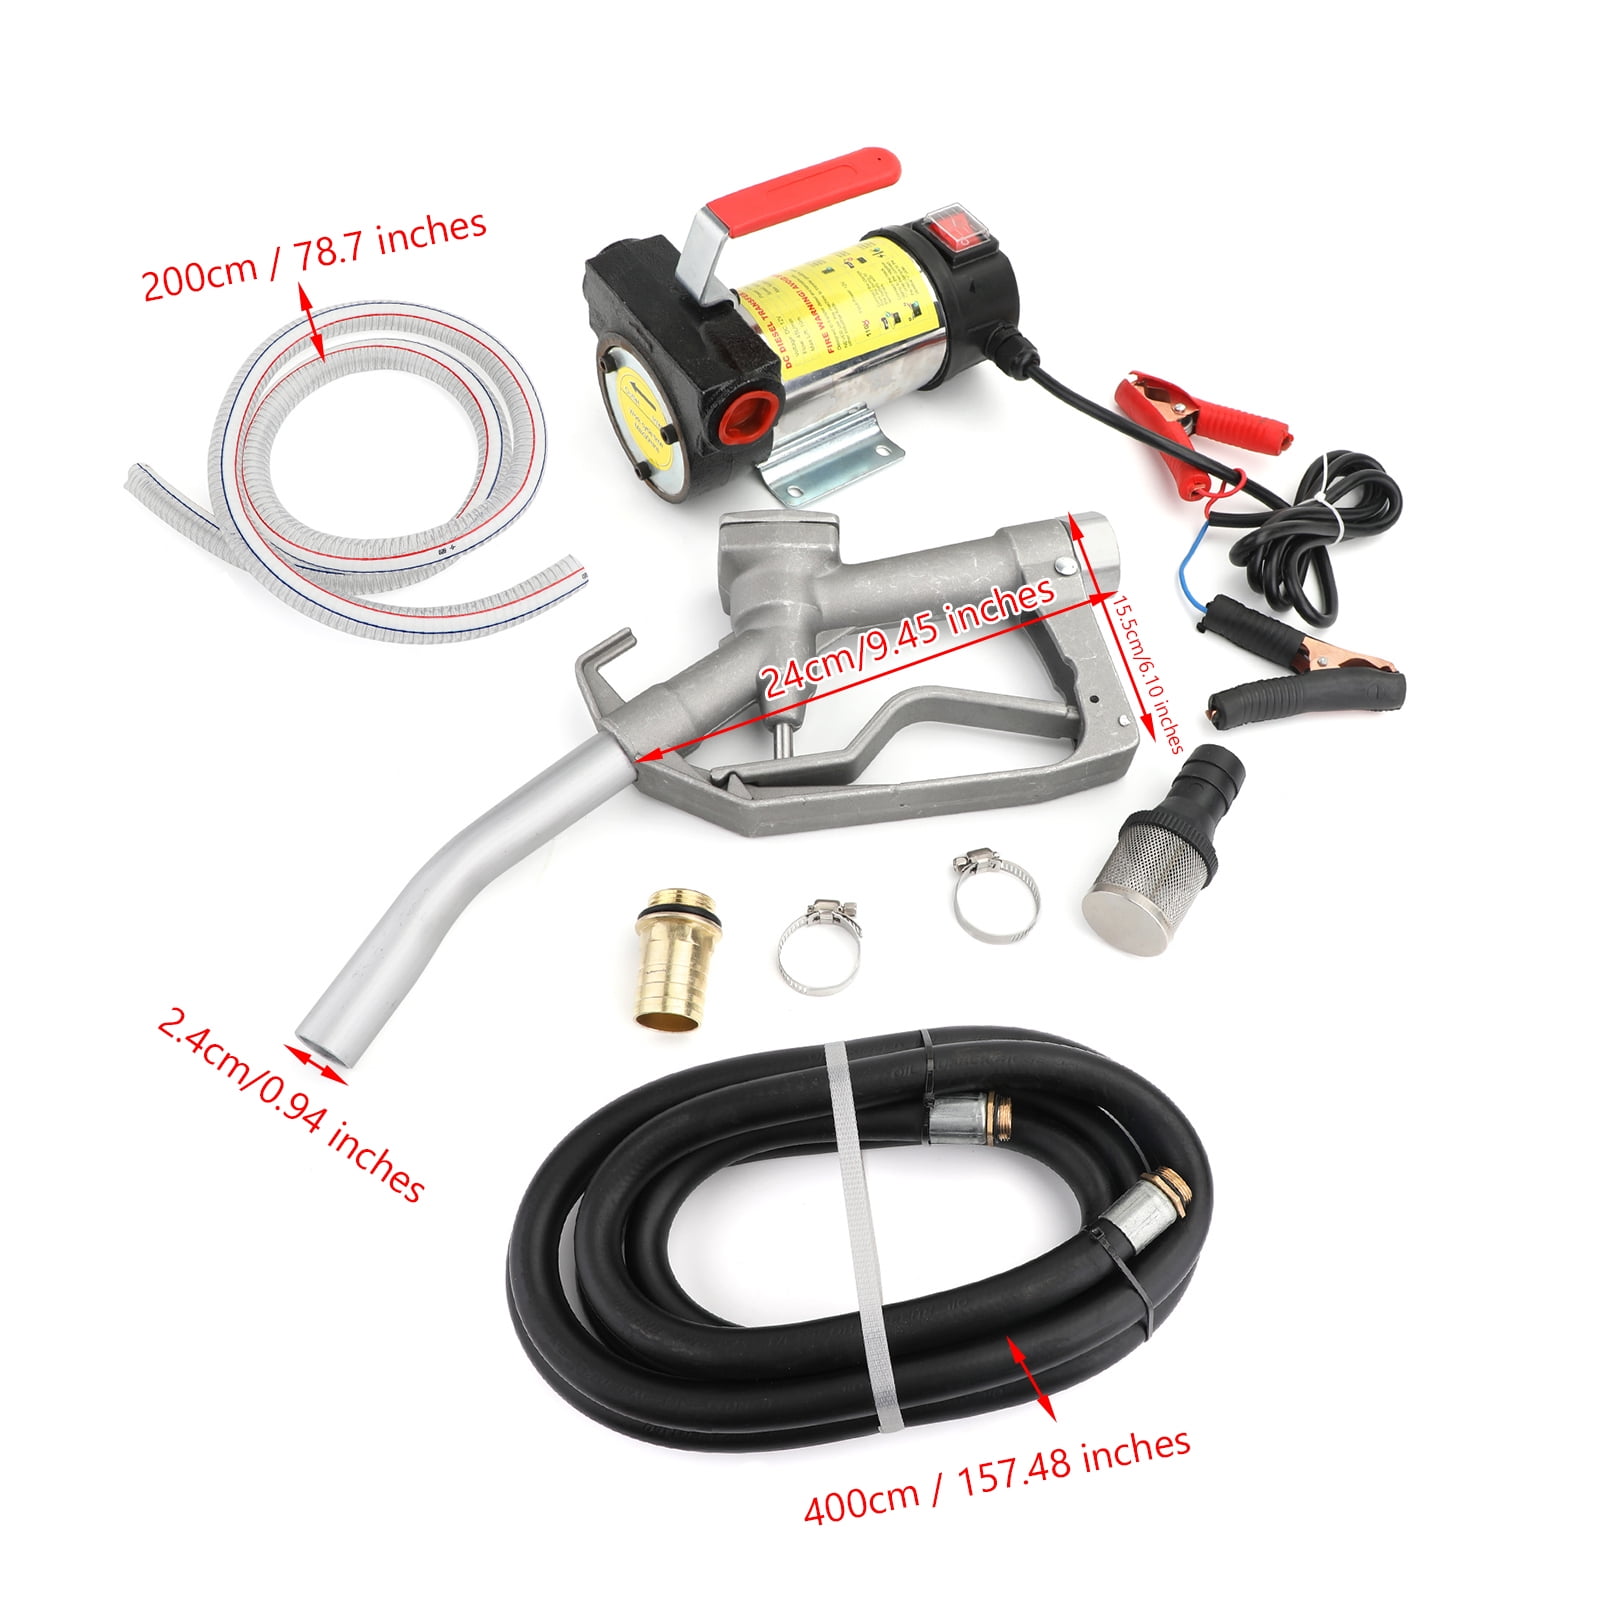 12V Electric Diesel Oil And Fuel Transfer Auto Extractor Pump w/ Nozzle & Hose A 